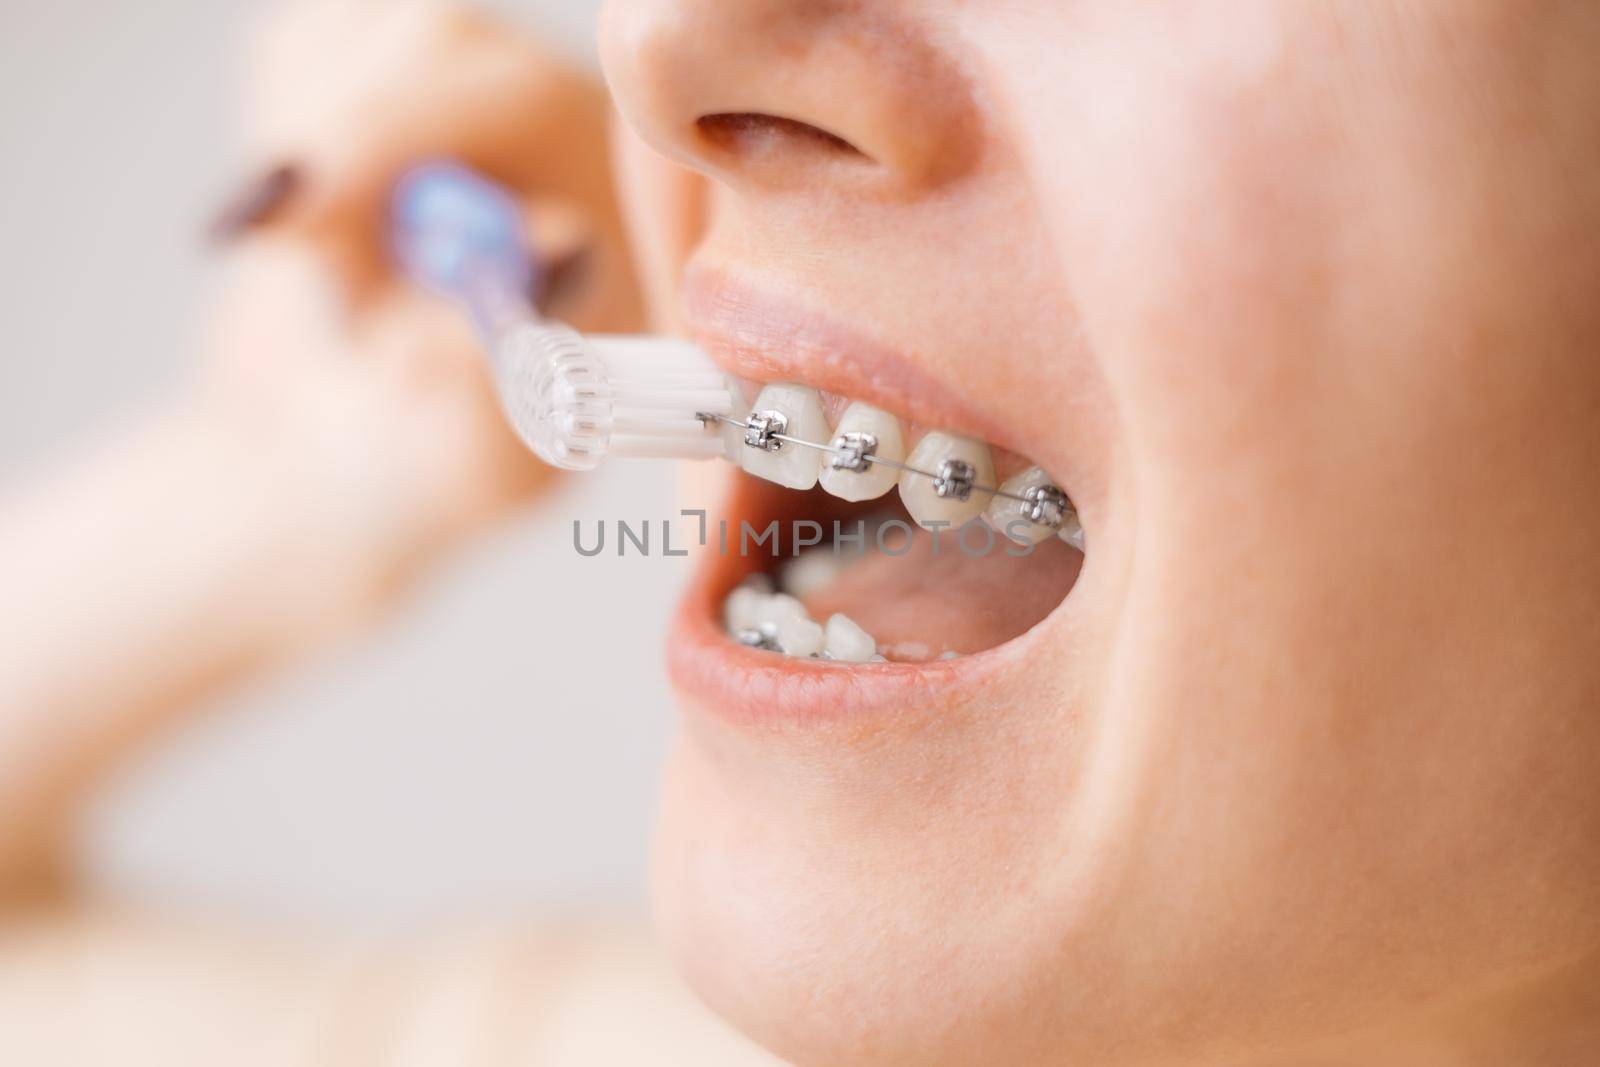 Unrecognizable young woman with braces on her teeth brushing her teeth with a toothbrush, close-up. Dental and oral care. Braces for leveling teeth.